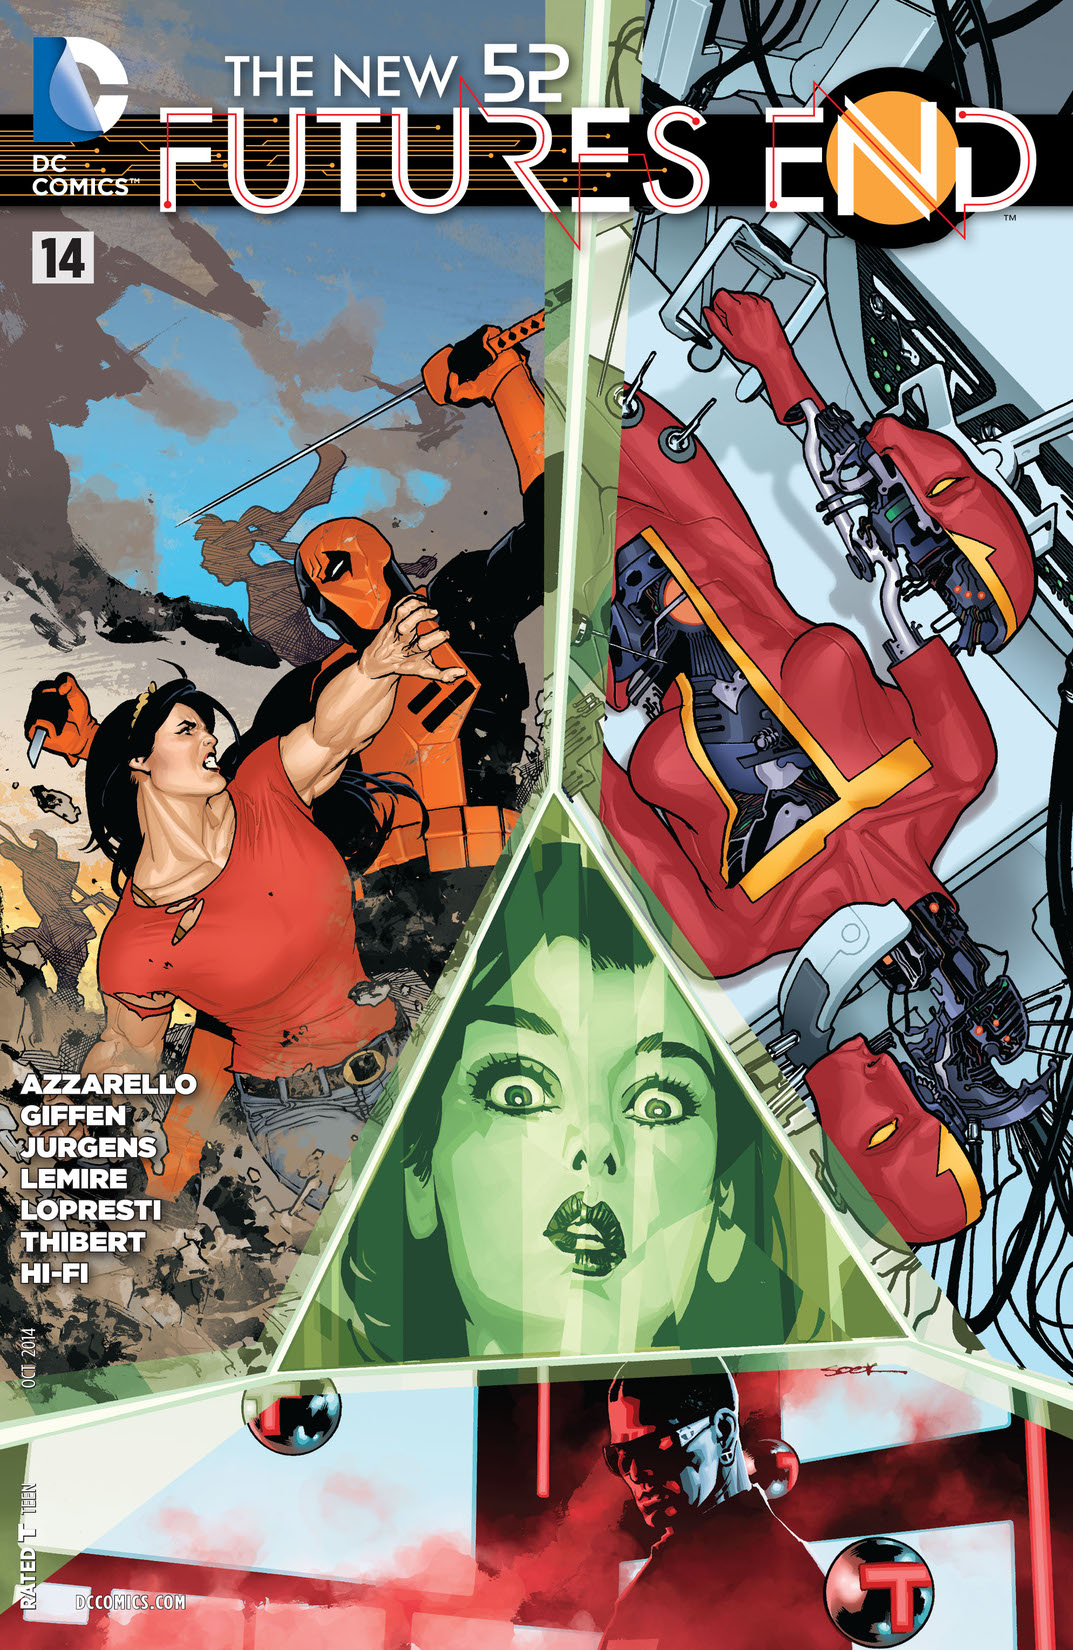 The New 52: Futures End #14 preview images